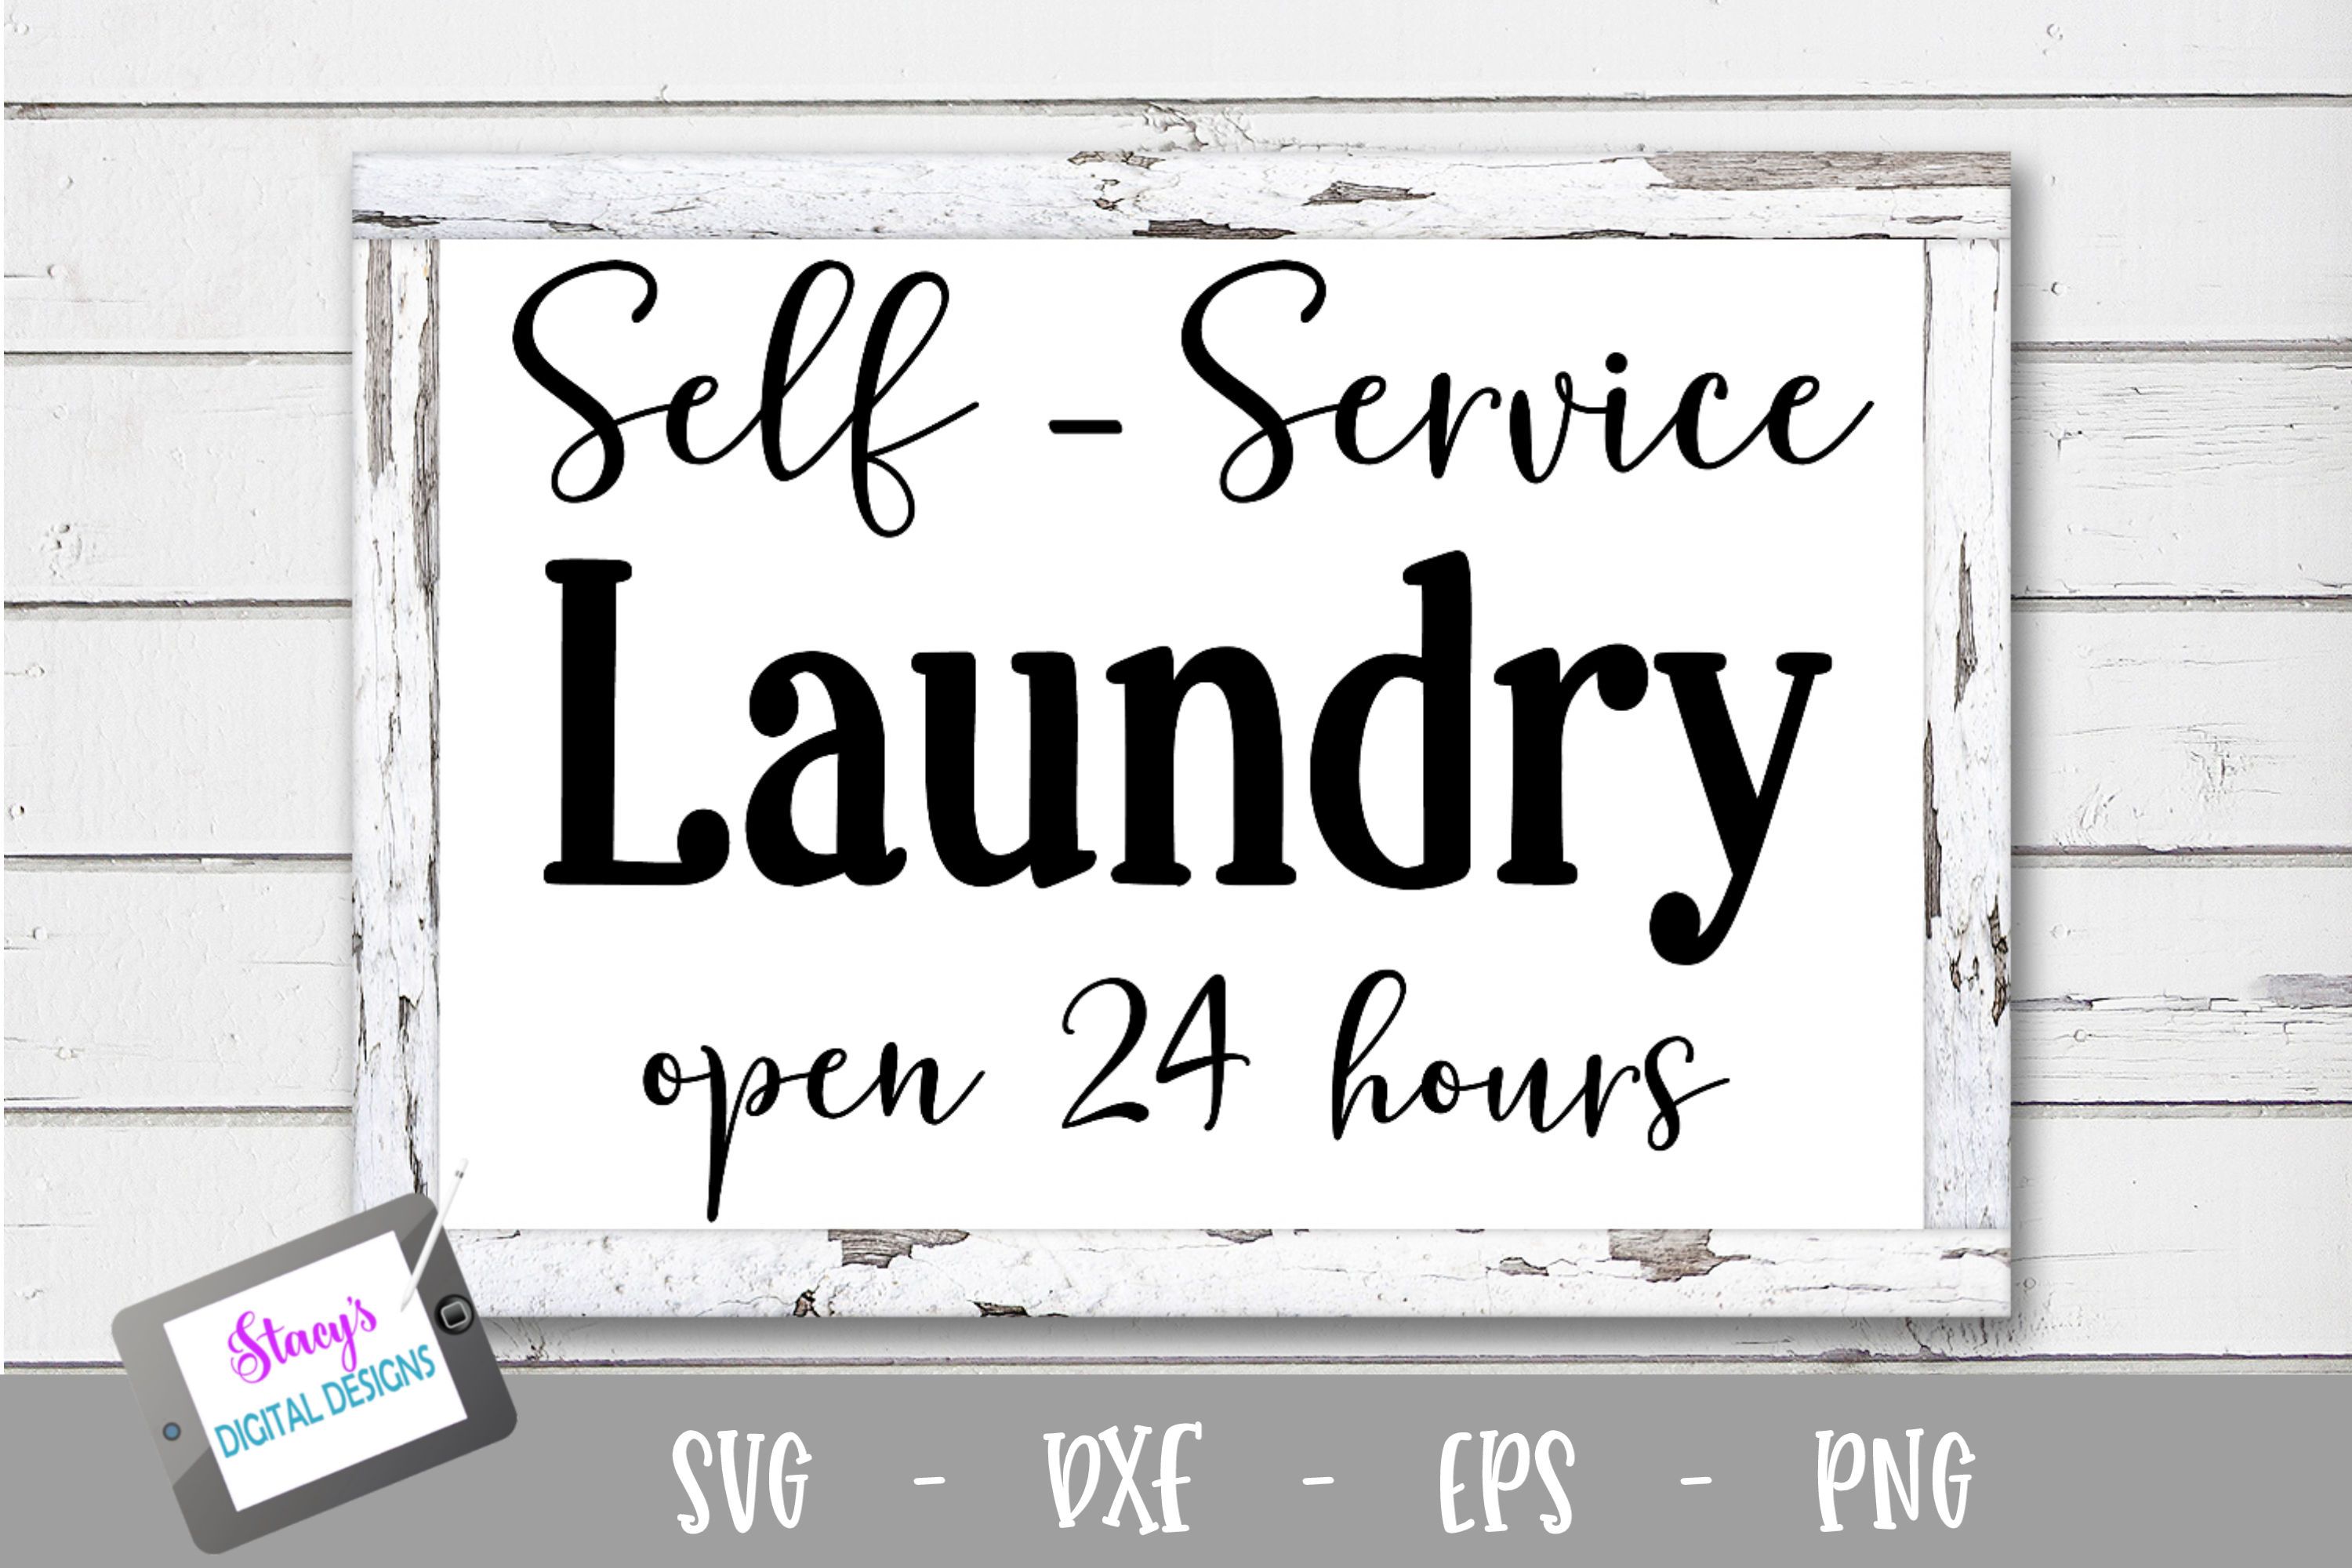 Download Laundry Open 24 Hours Svg Png Dxf Cut File Art Collectibles Drawing Illustration Safarni Org